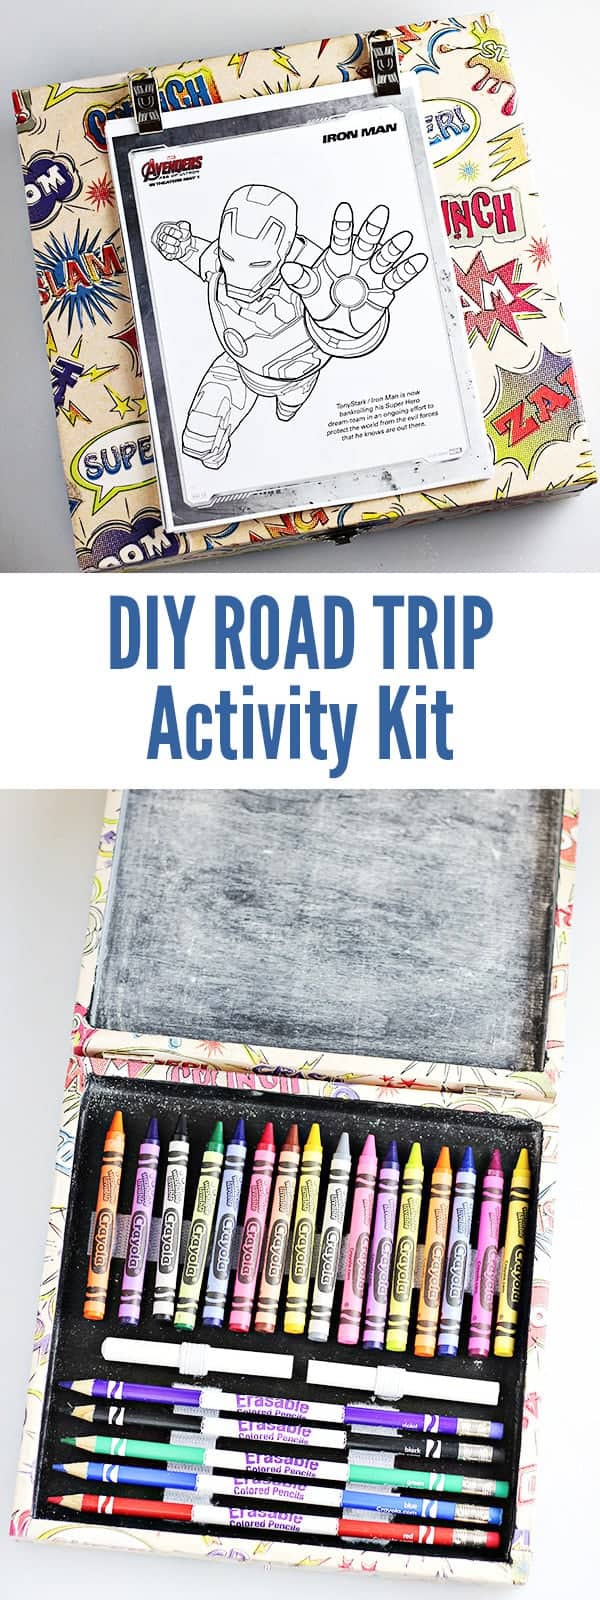 Best Idea EVER! Quick and easy DIY Art box for kids. They can take this and be entertained anywhere!